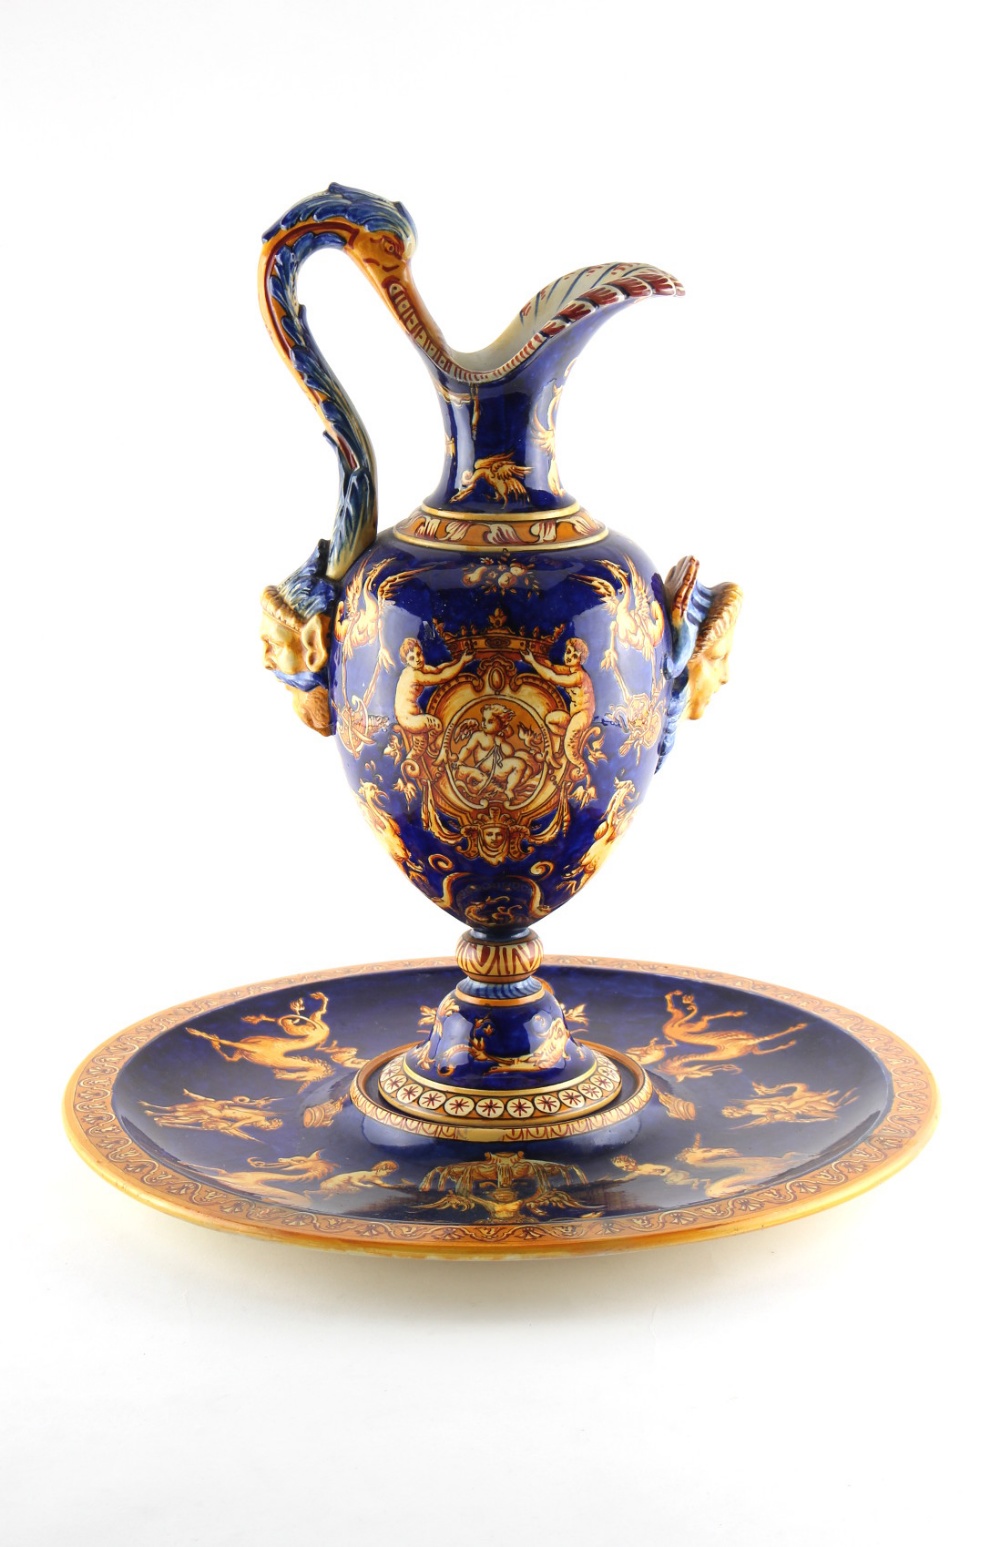 Property of a gentleman - a large late 19th century Gien faience ewer & stand in the Renaissance